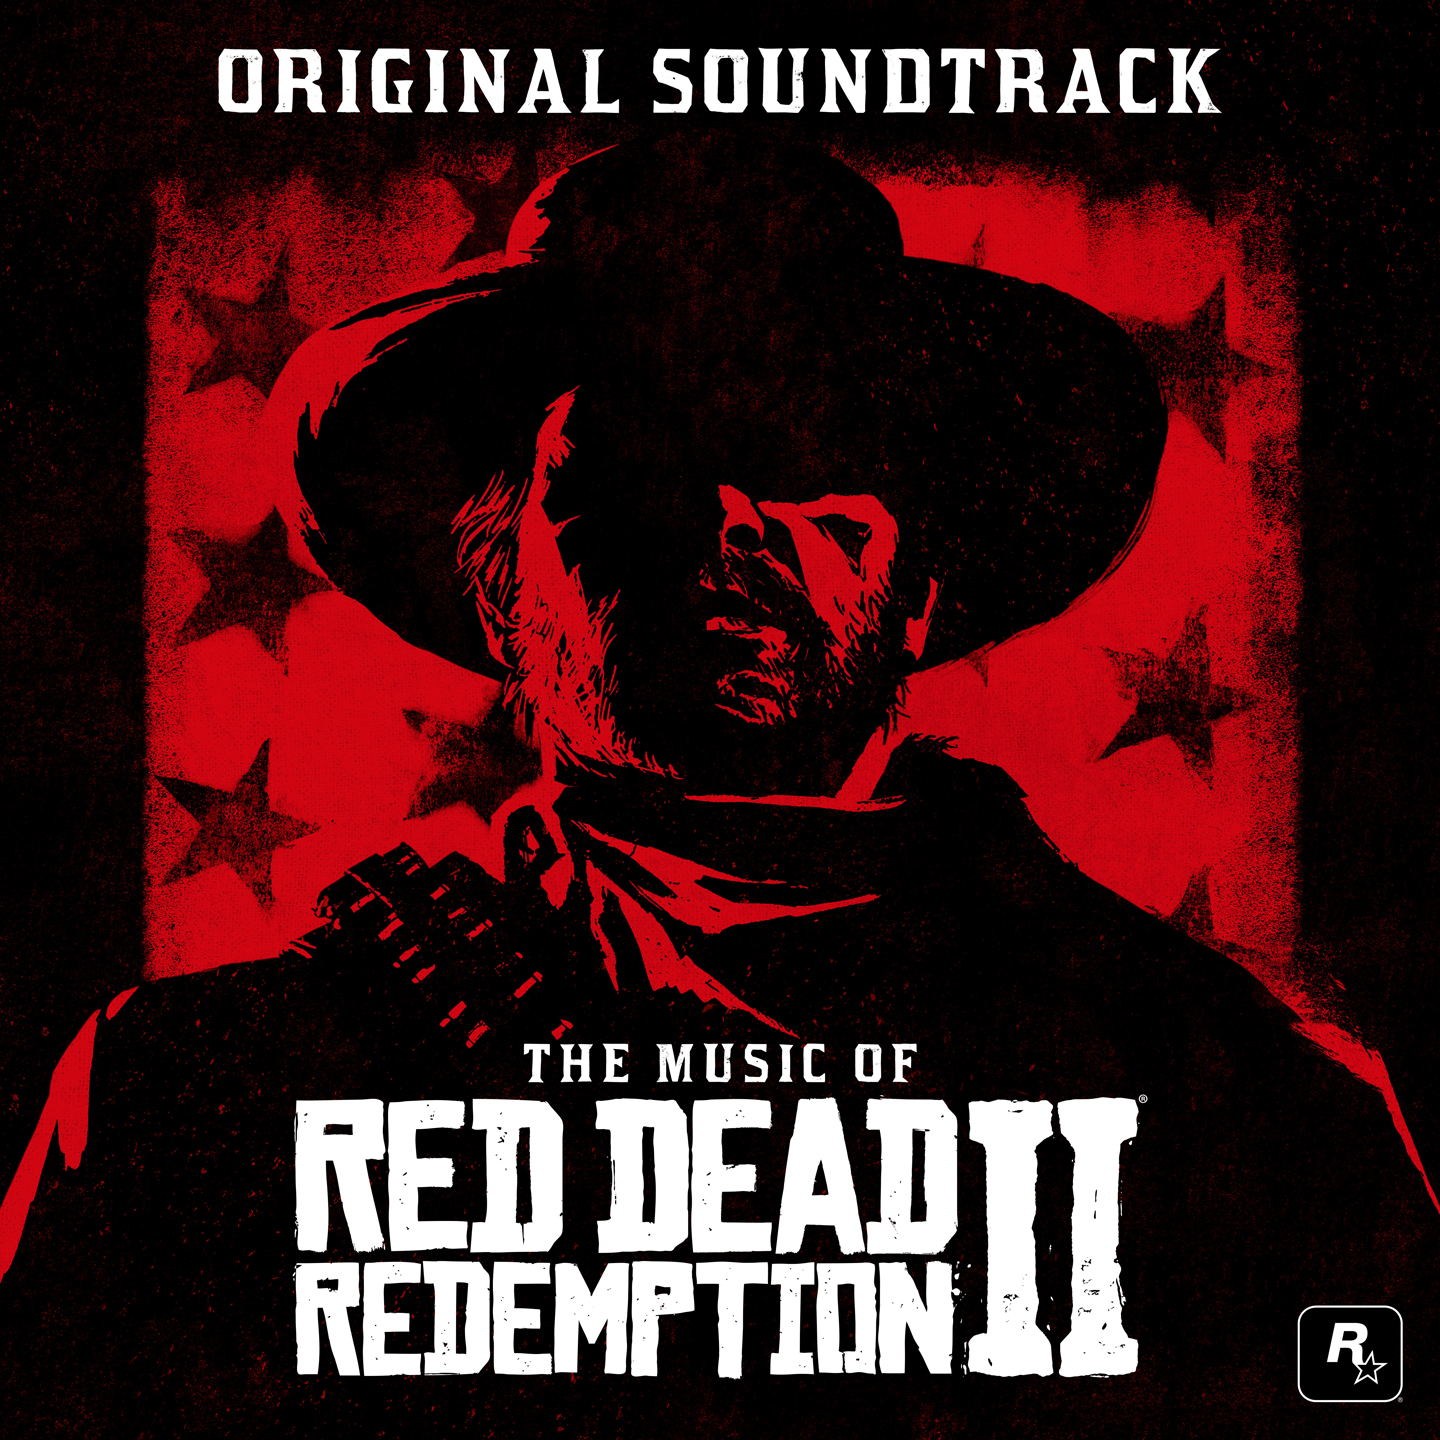 The Music Of Red Dead Redemption 2 Original Soundtrack Available July 12 Rockstar Games - roblox red dead redemption song id